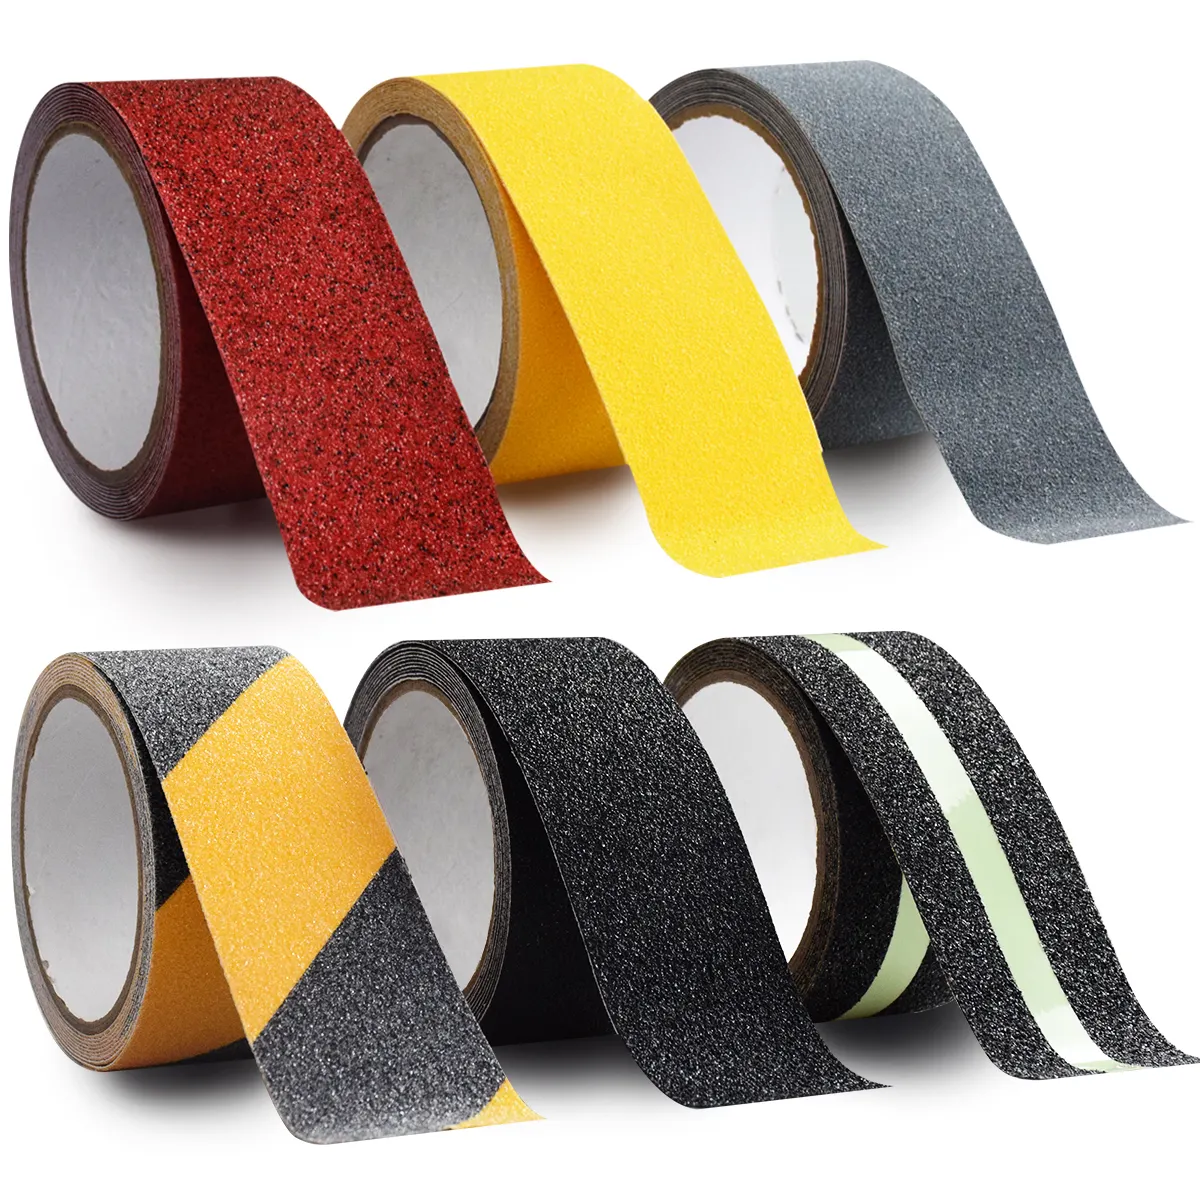 EONBON Best Outdoor Anti Slip Tape For Stairs, Anti Slip Tape Roll Of For Cutting Anti Slip Tape Strips